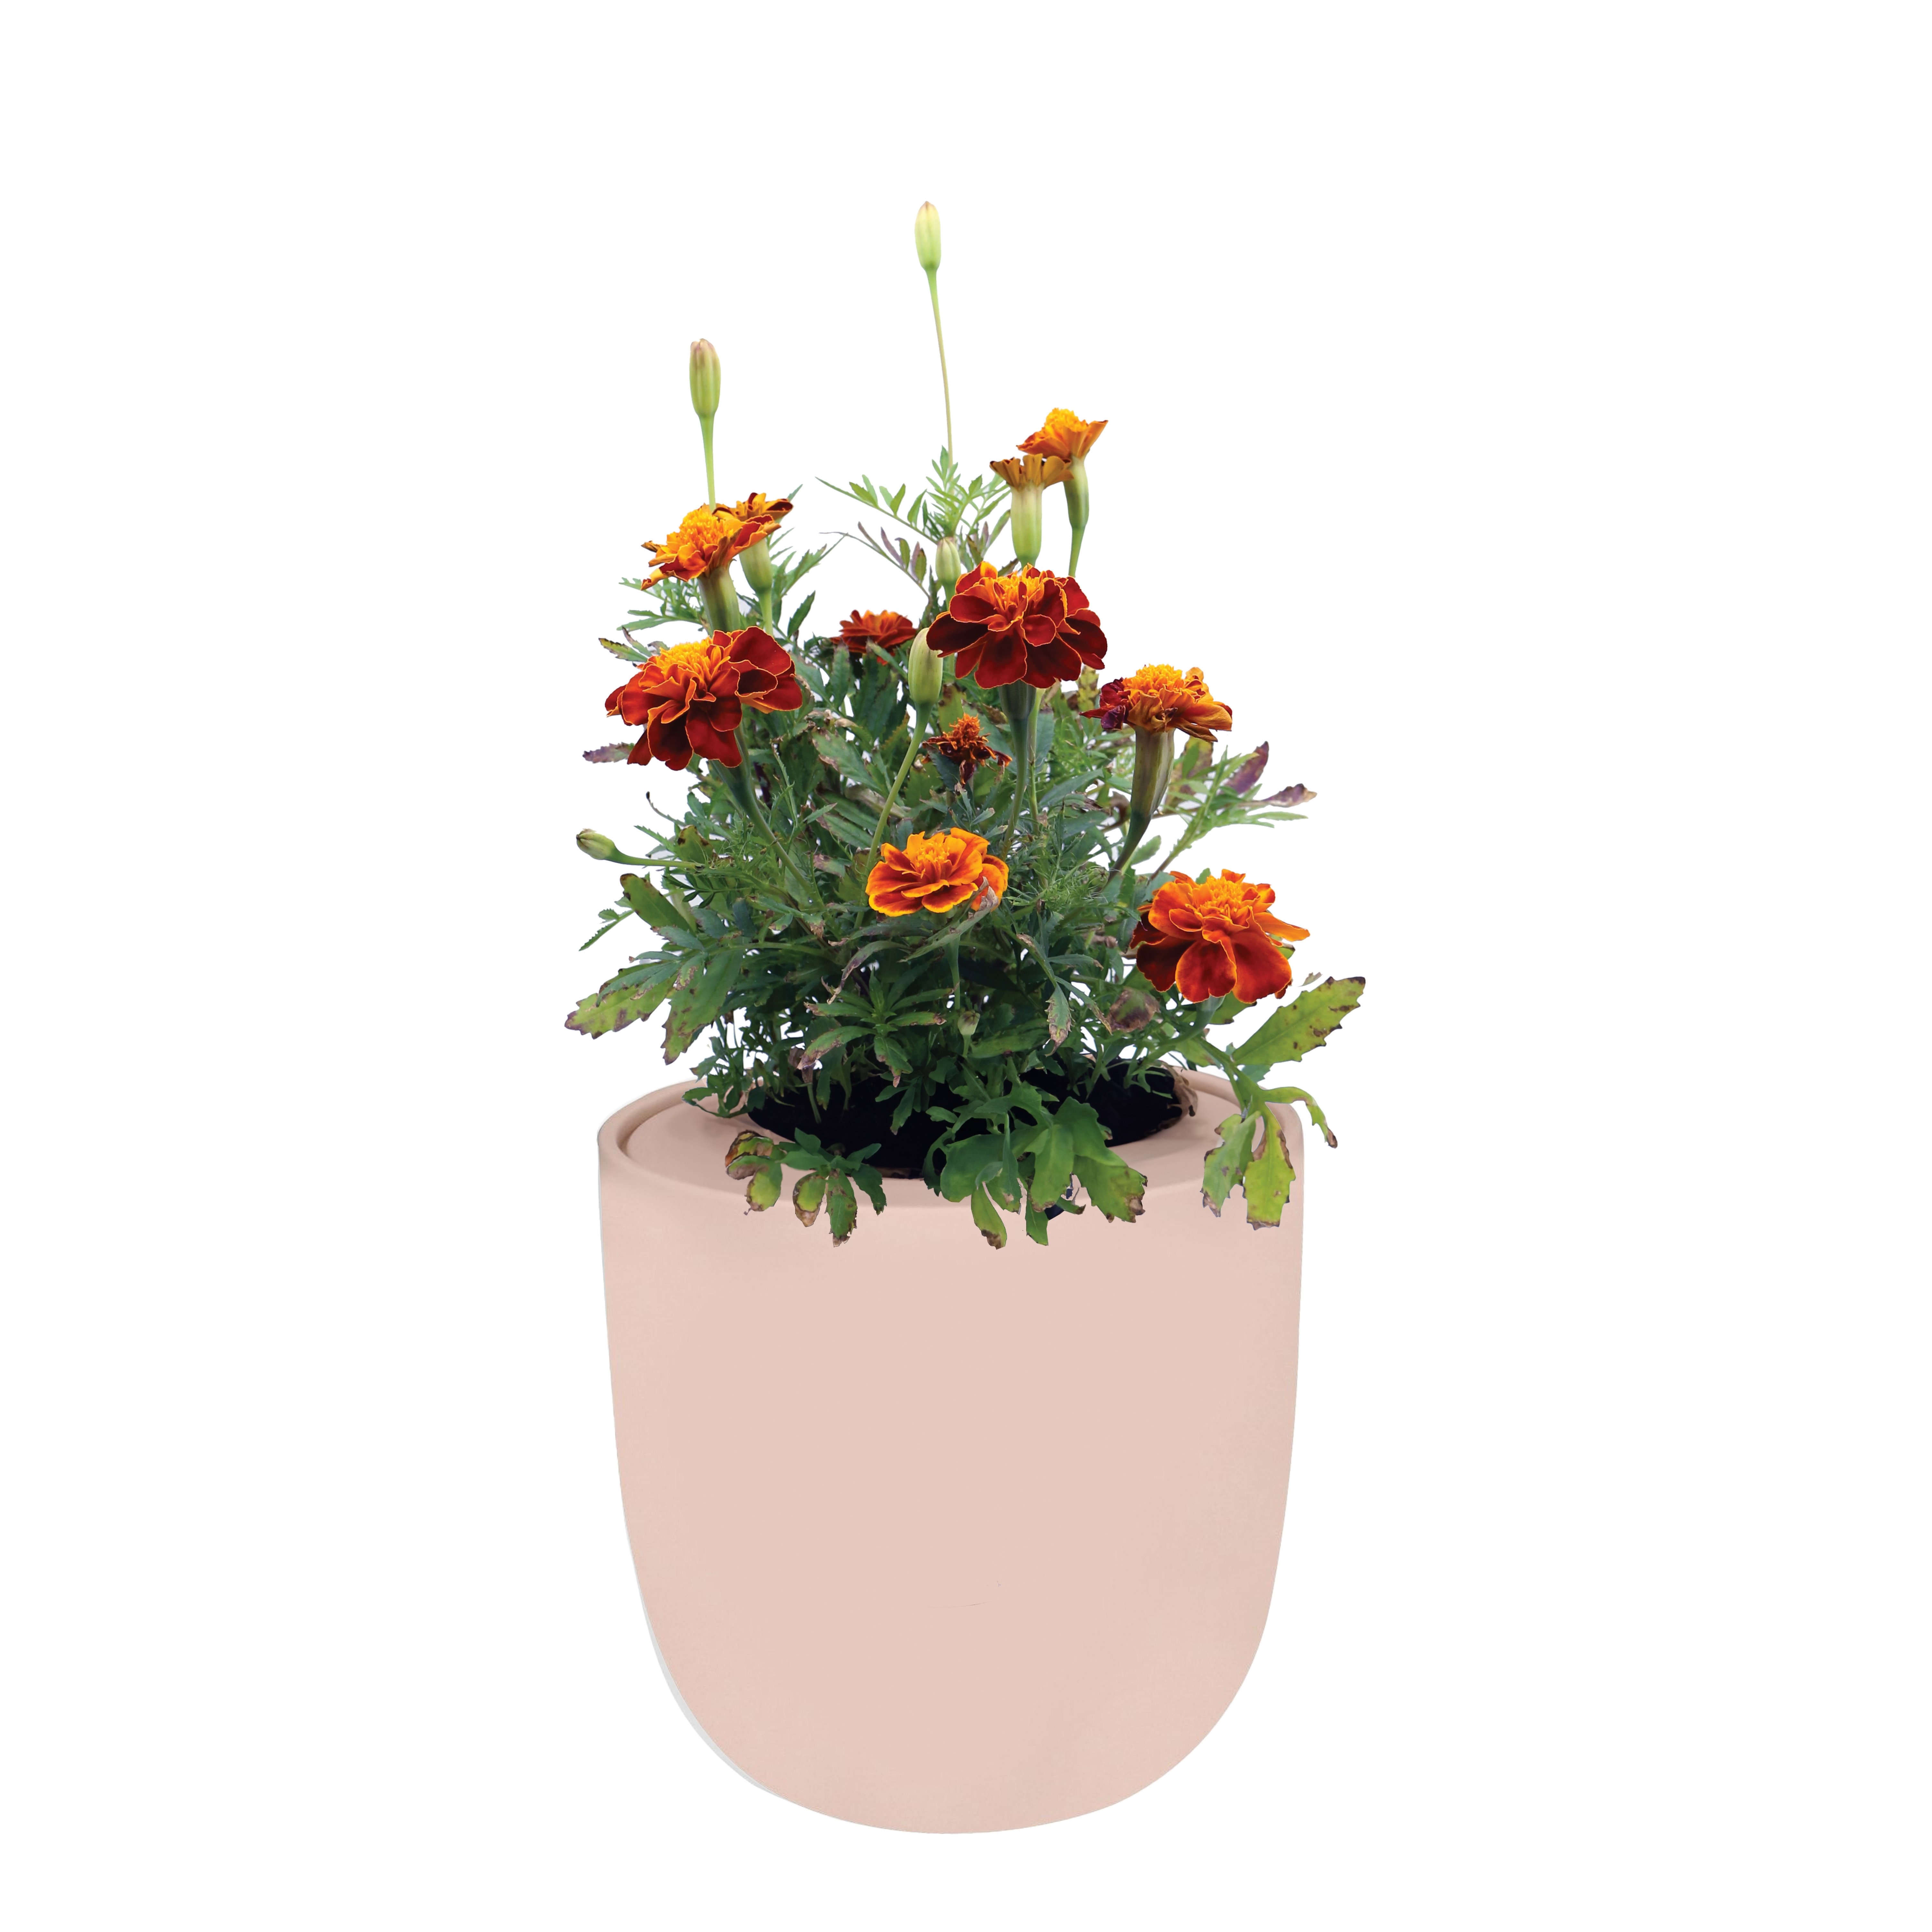 Marigold - French Double Dwarf Pink Ceramic Pot Hydroponic Growing Kit with Seeds